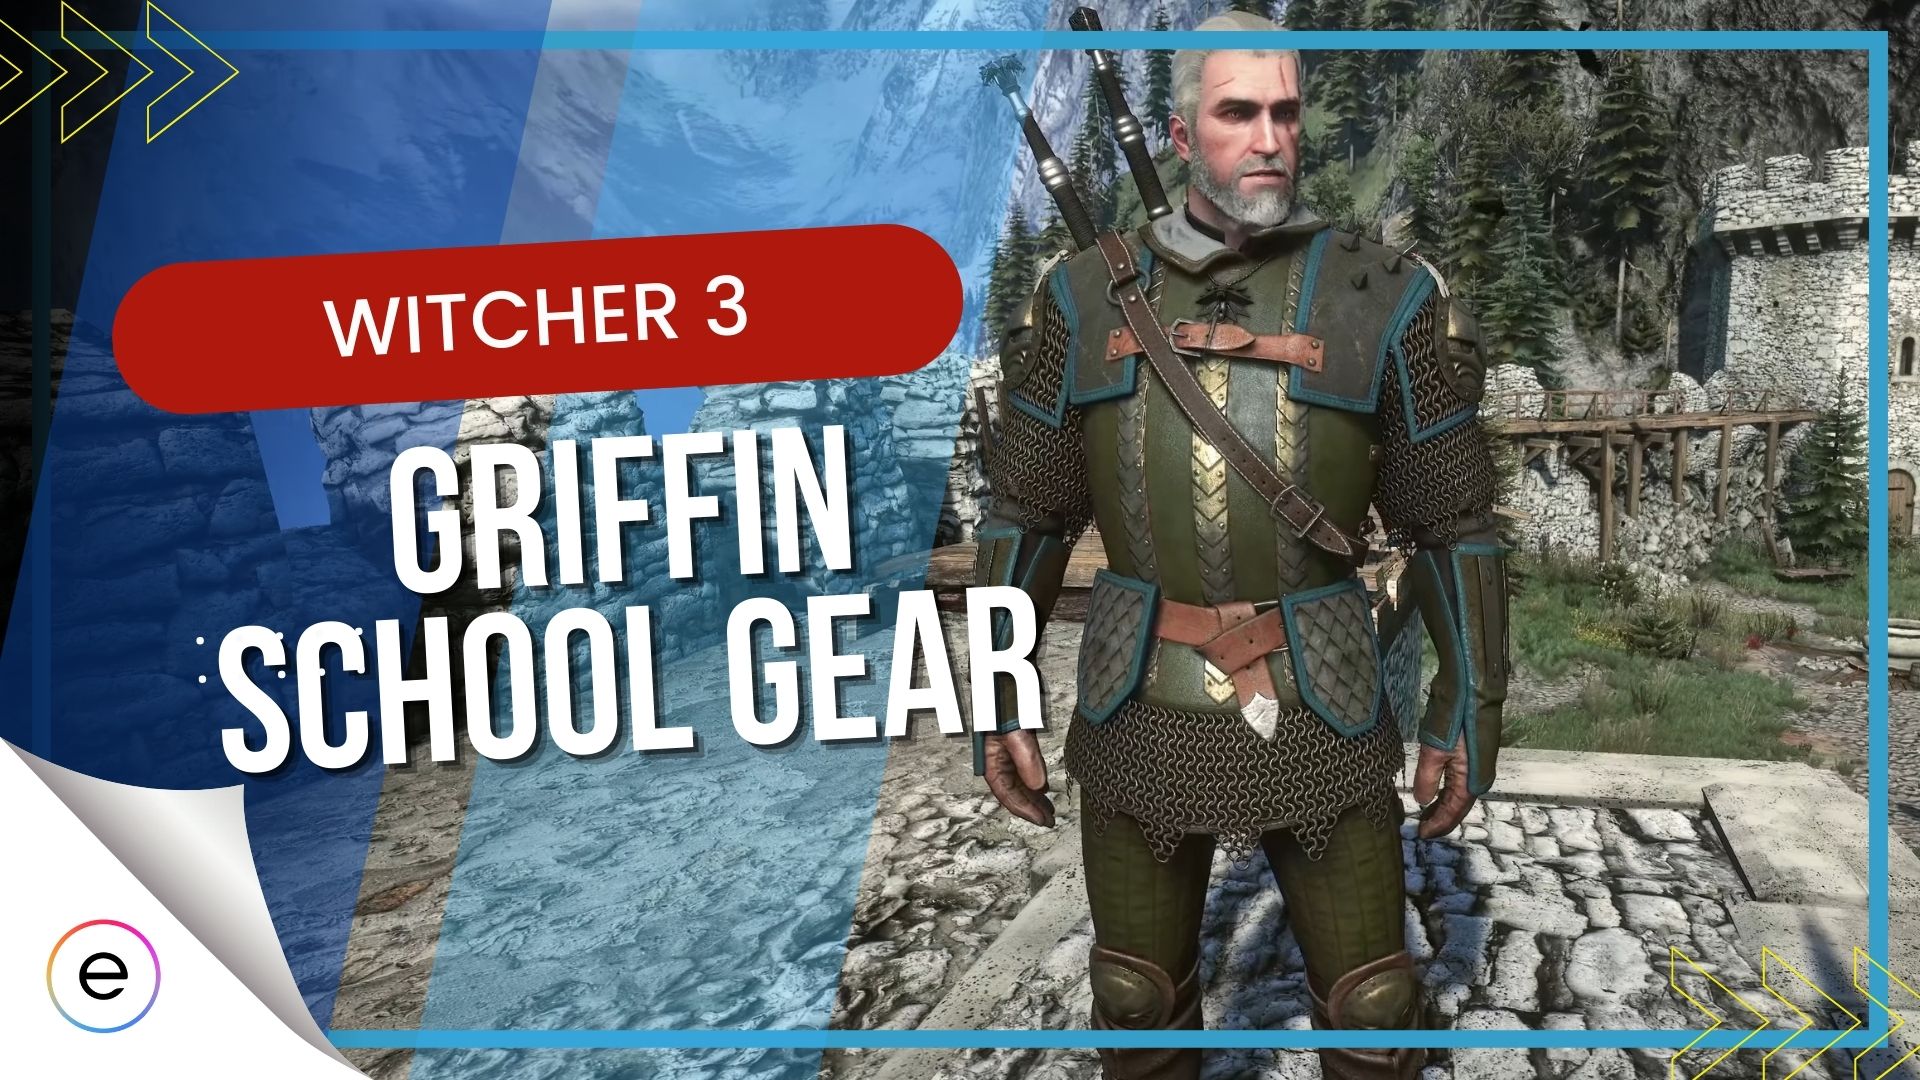 The Griffin School Gear in Witcher 3.